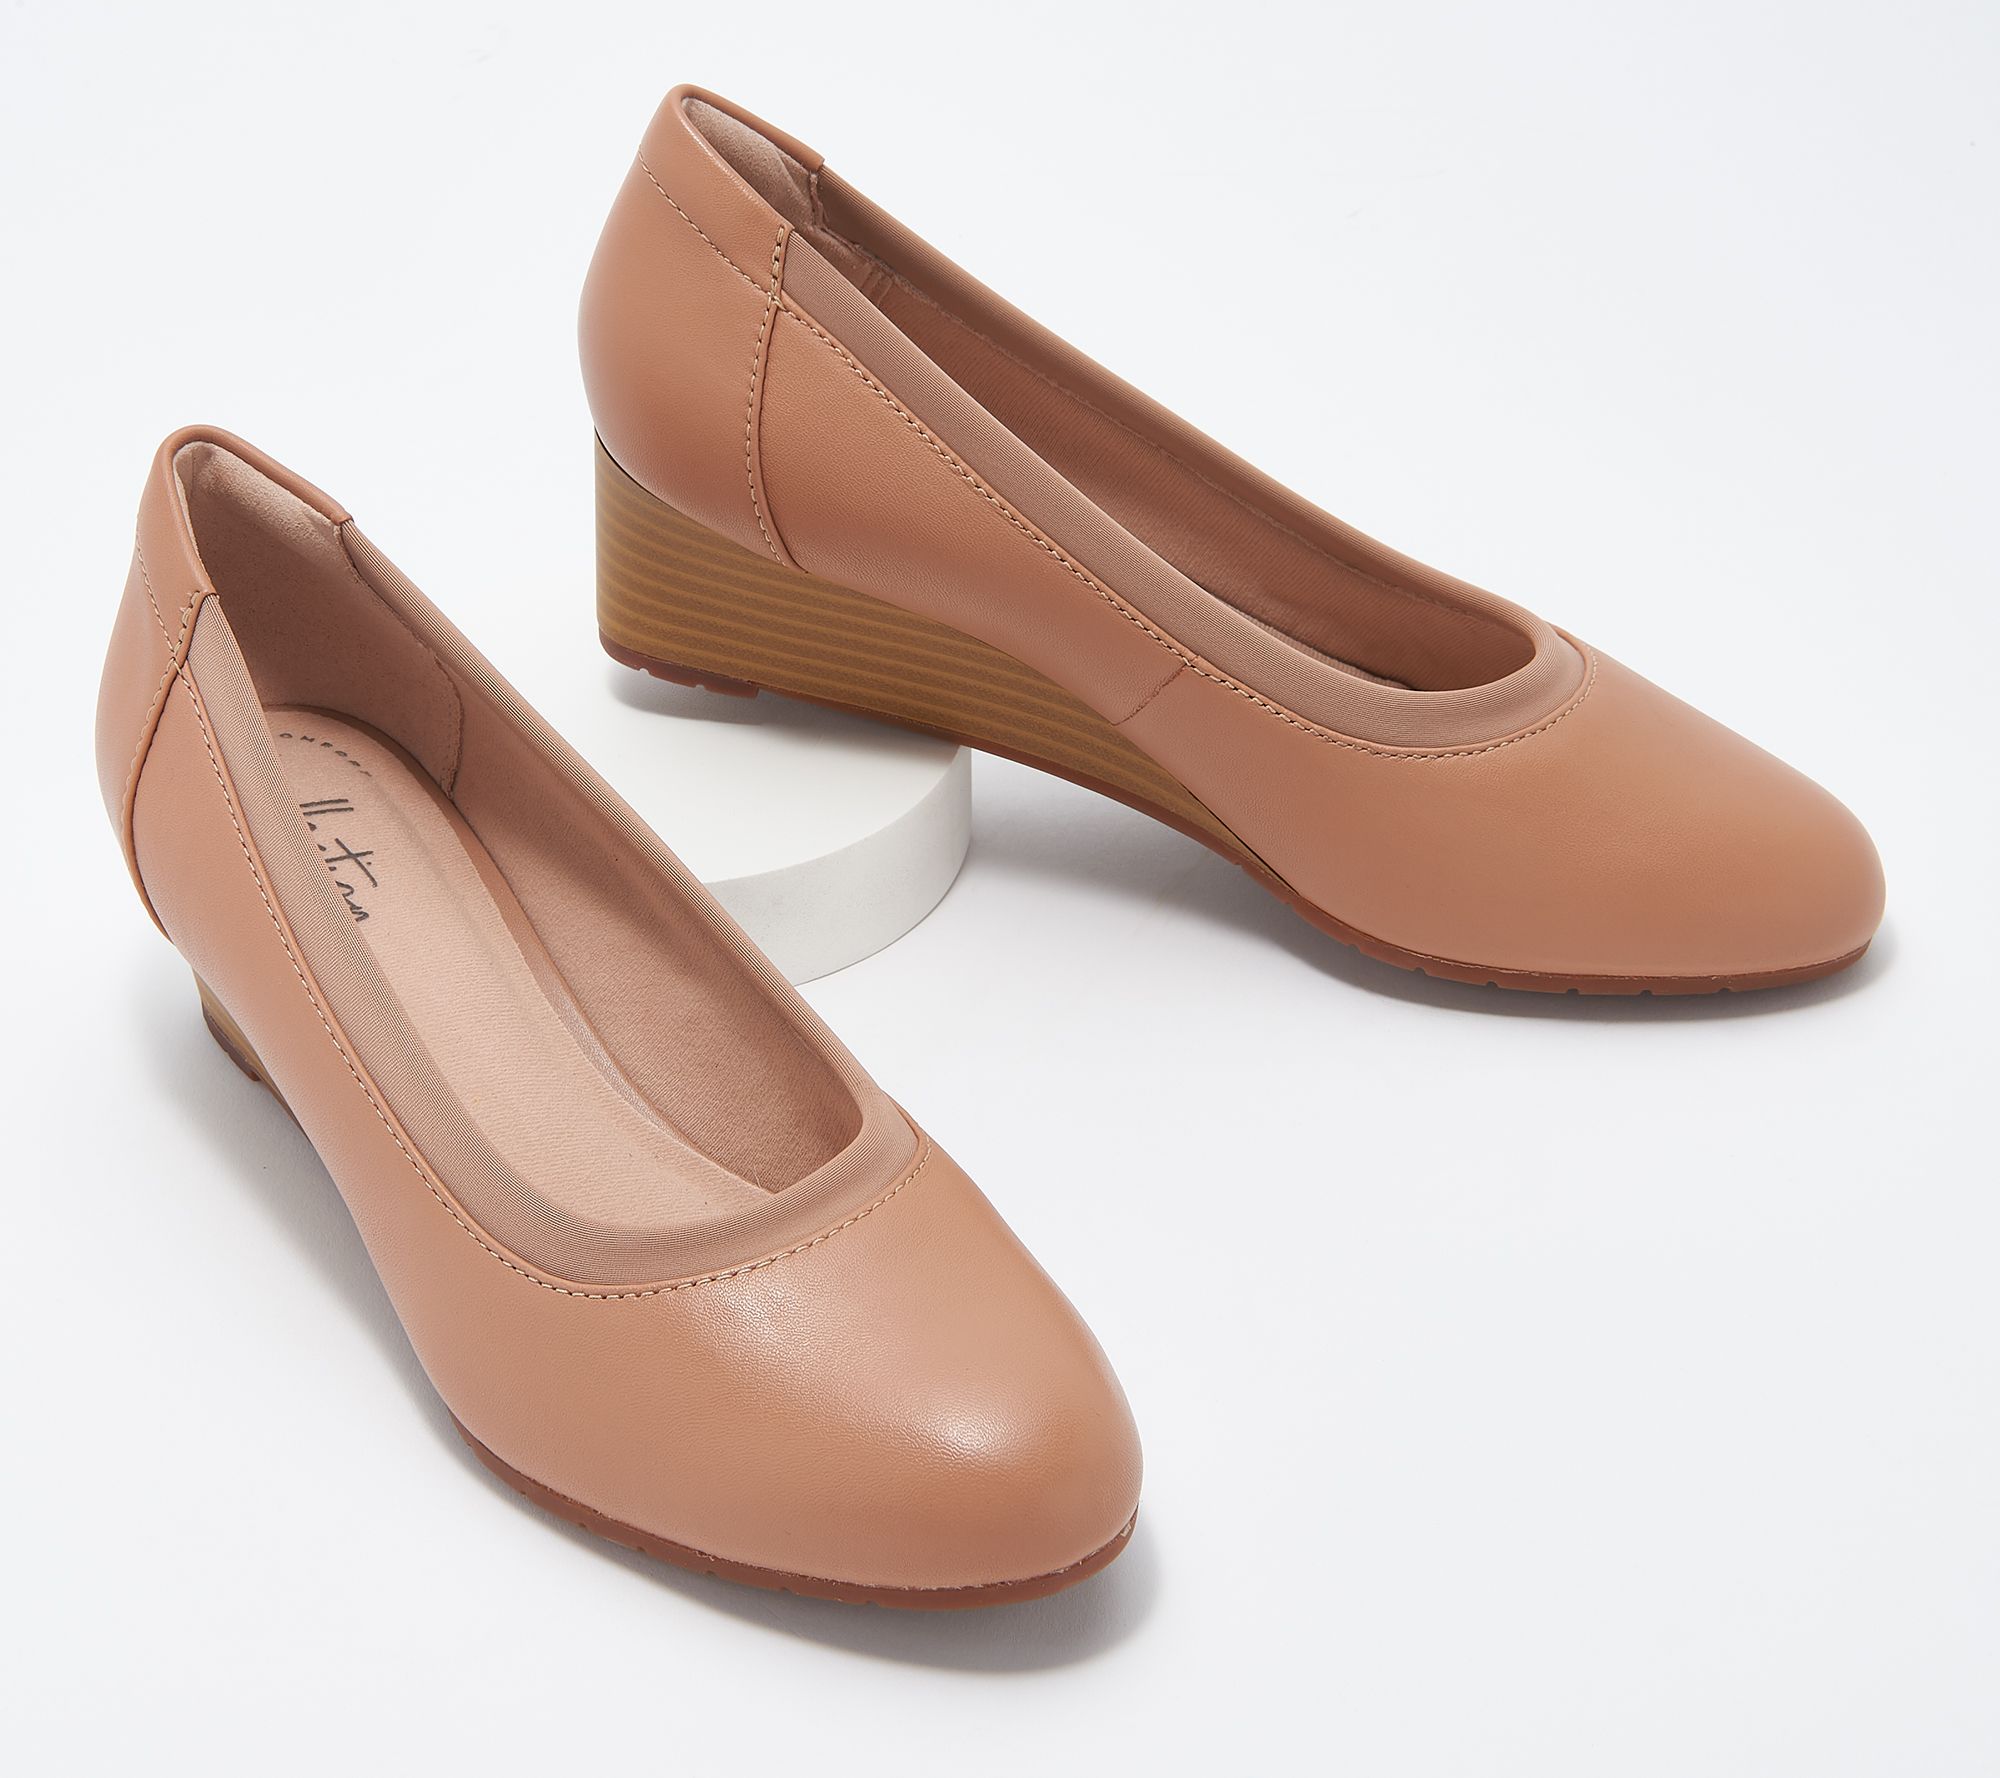 clarks wedge shoes